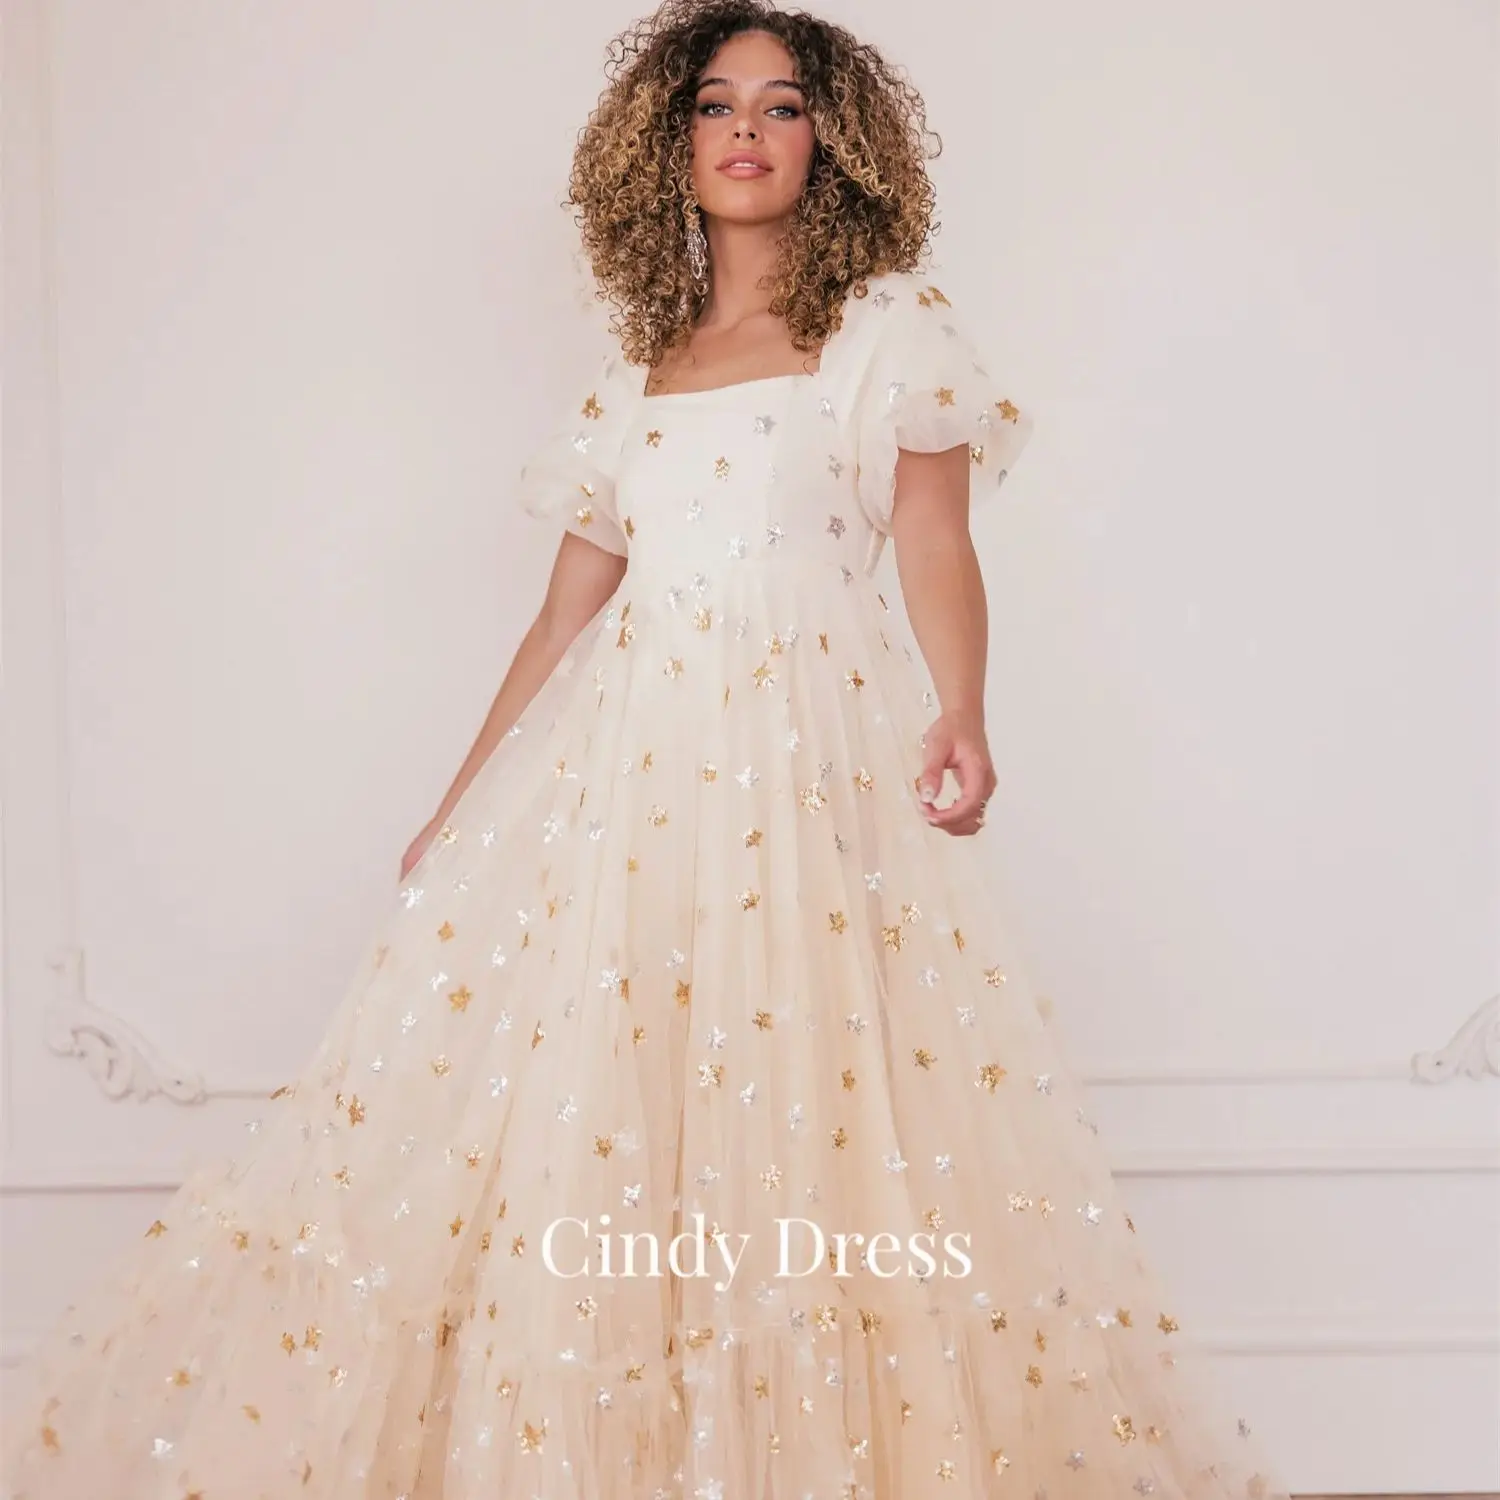 

Cindy Star Square Neck Layered Short Sleeve Champagne Gala Dress Elegant and Pretty Women's Dresses Sharon Happy 2023 Party Prom